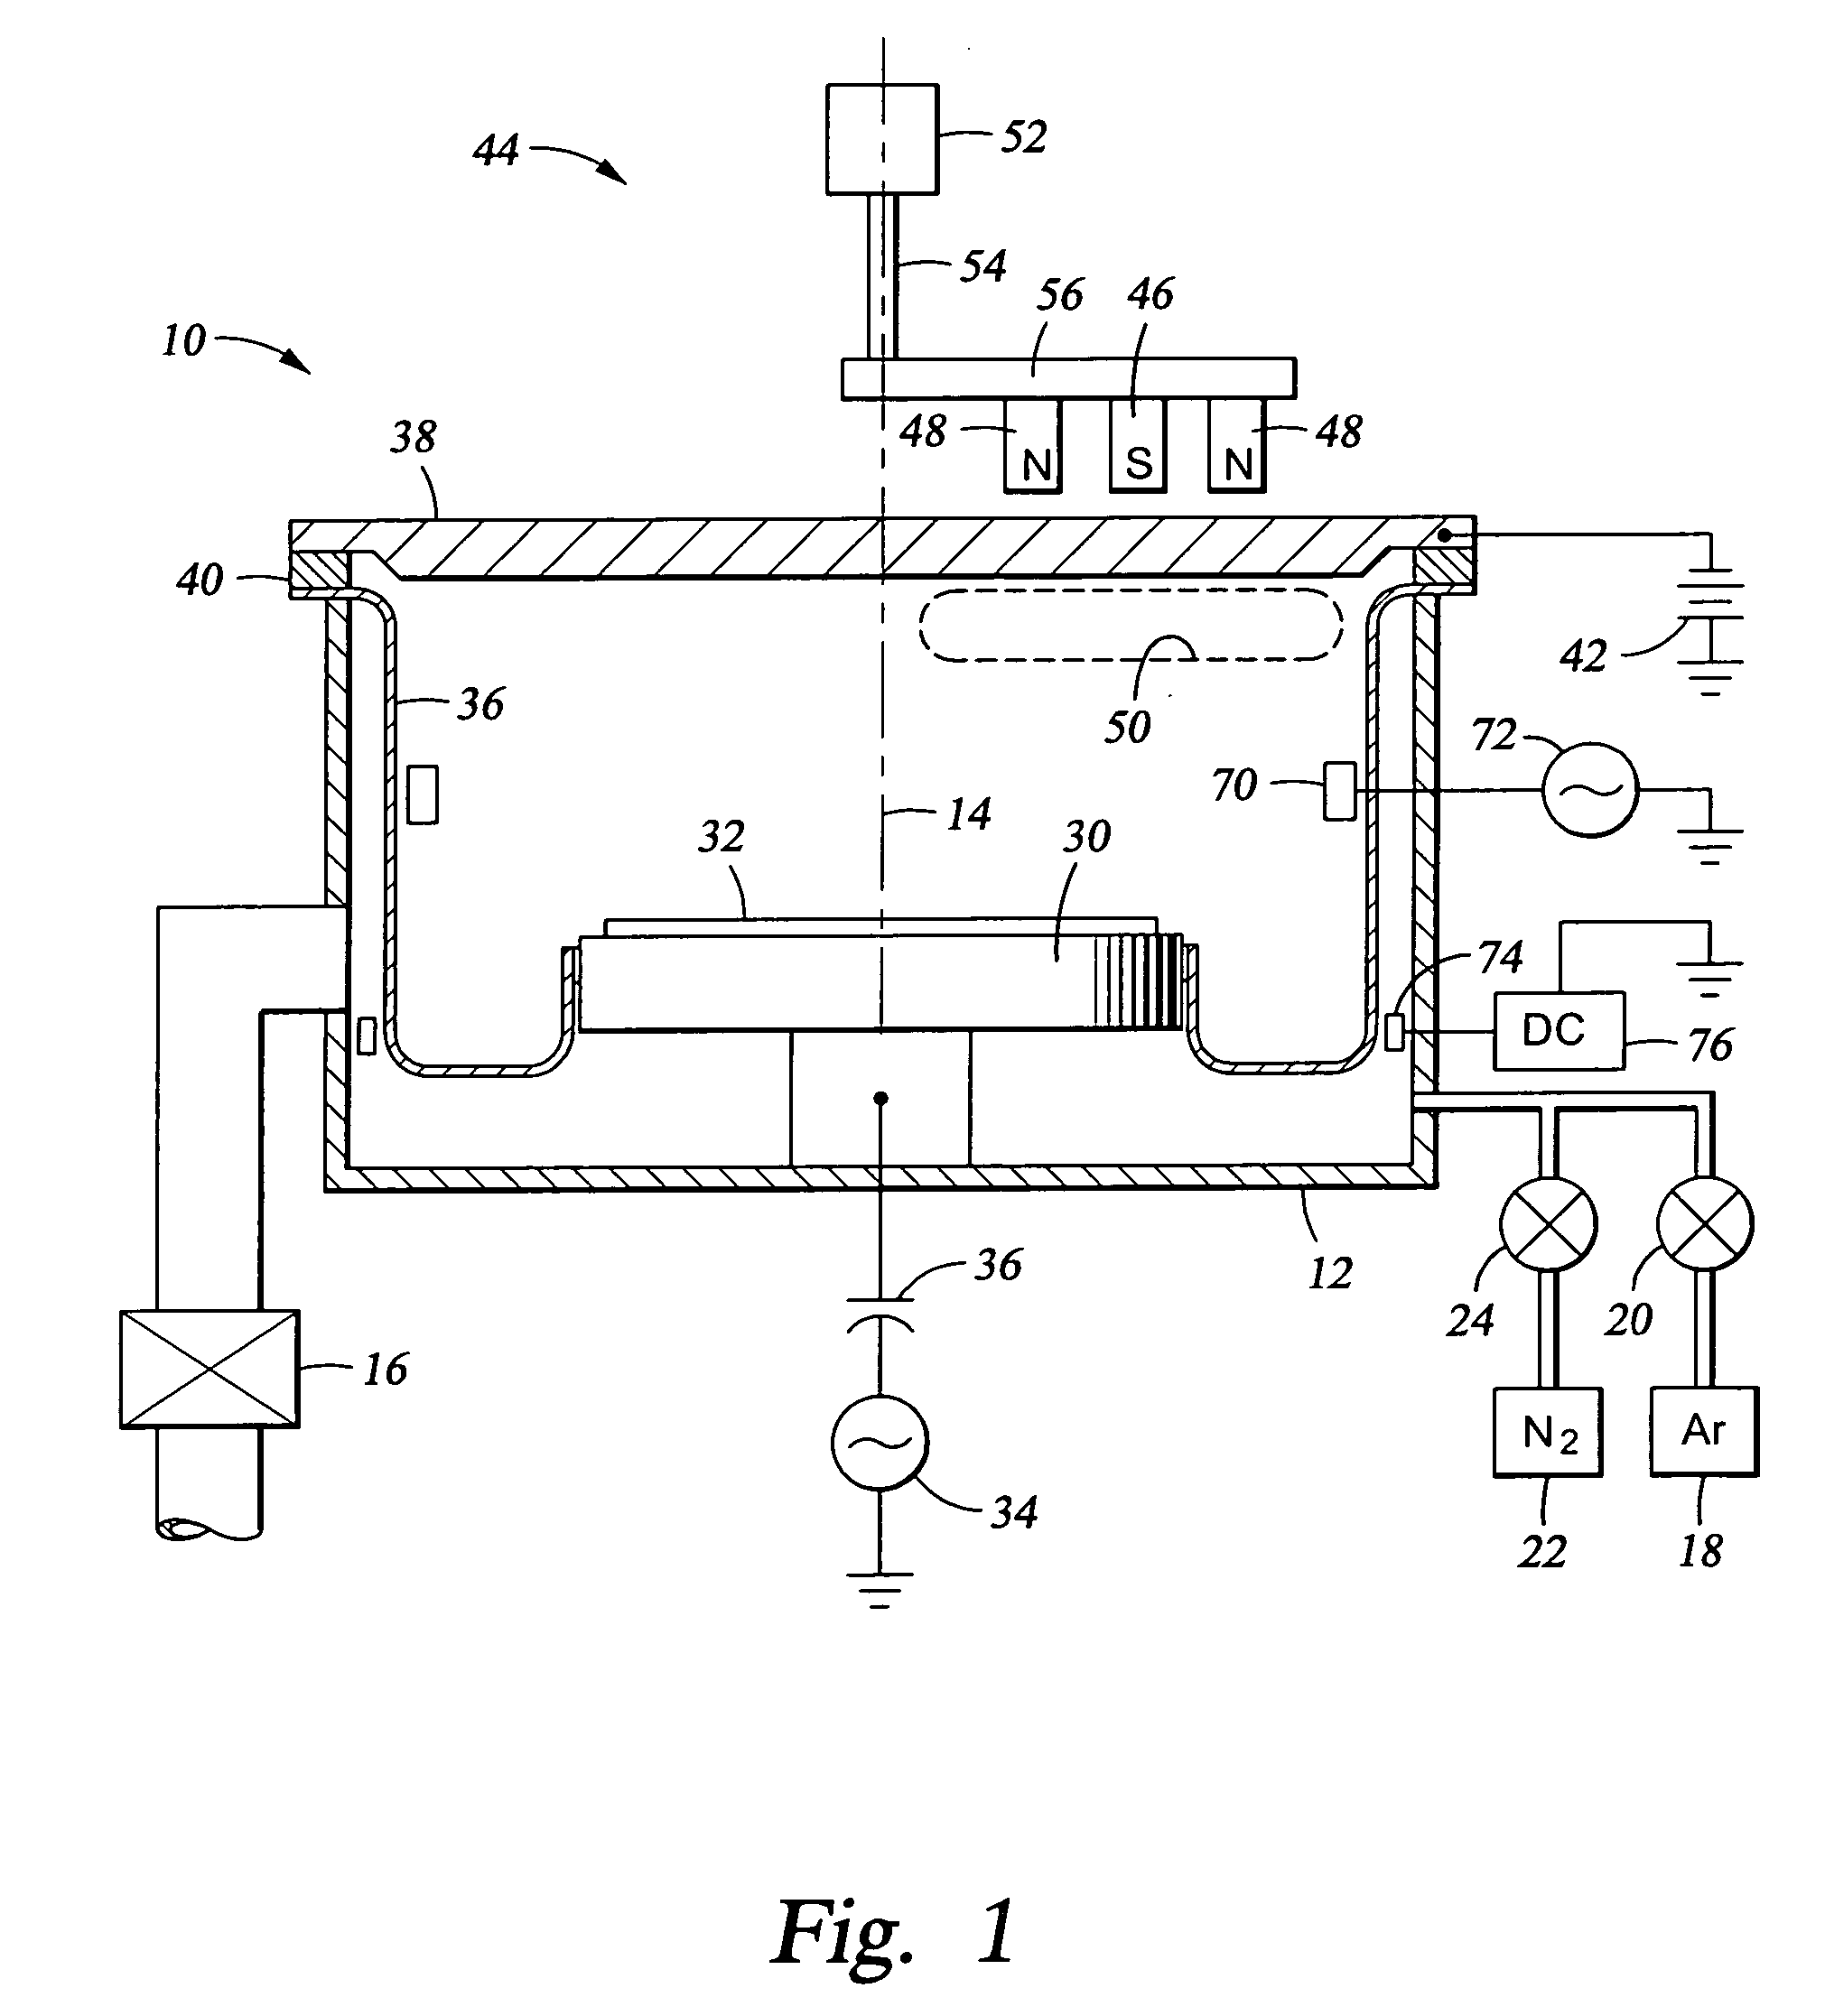 Integrated process for sputter deposition of a conductive barrier layer, especially an alloy of ruthenium and tantalum, underlying copper or copper alloy seed layer